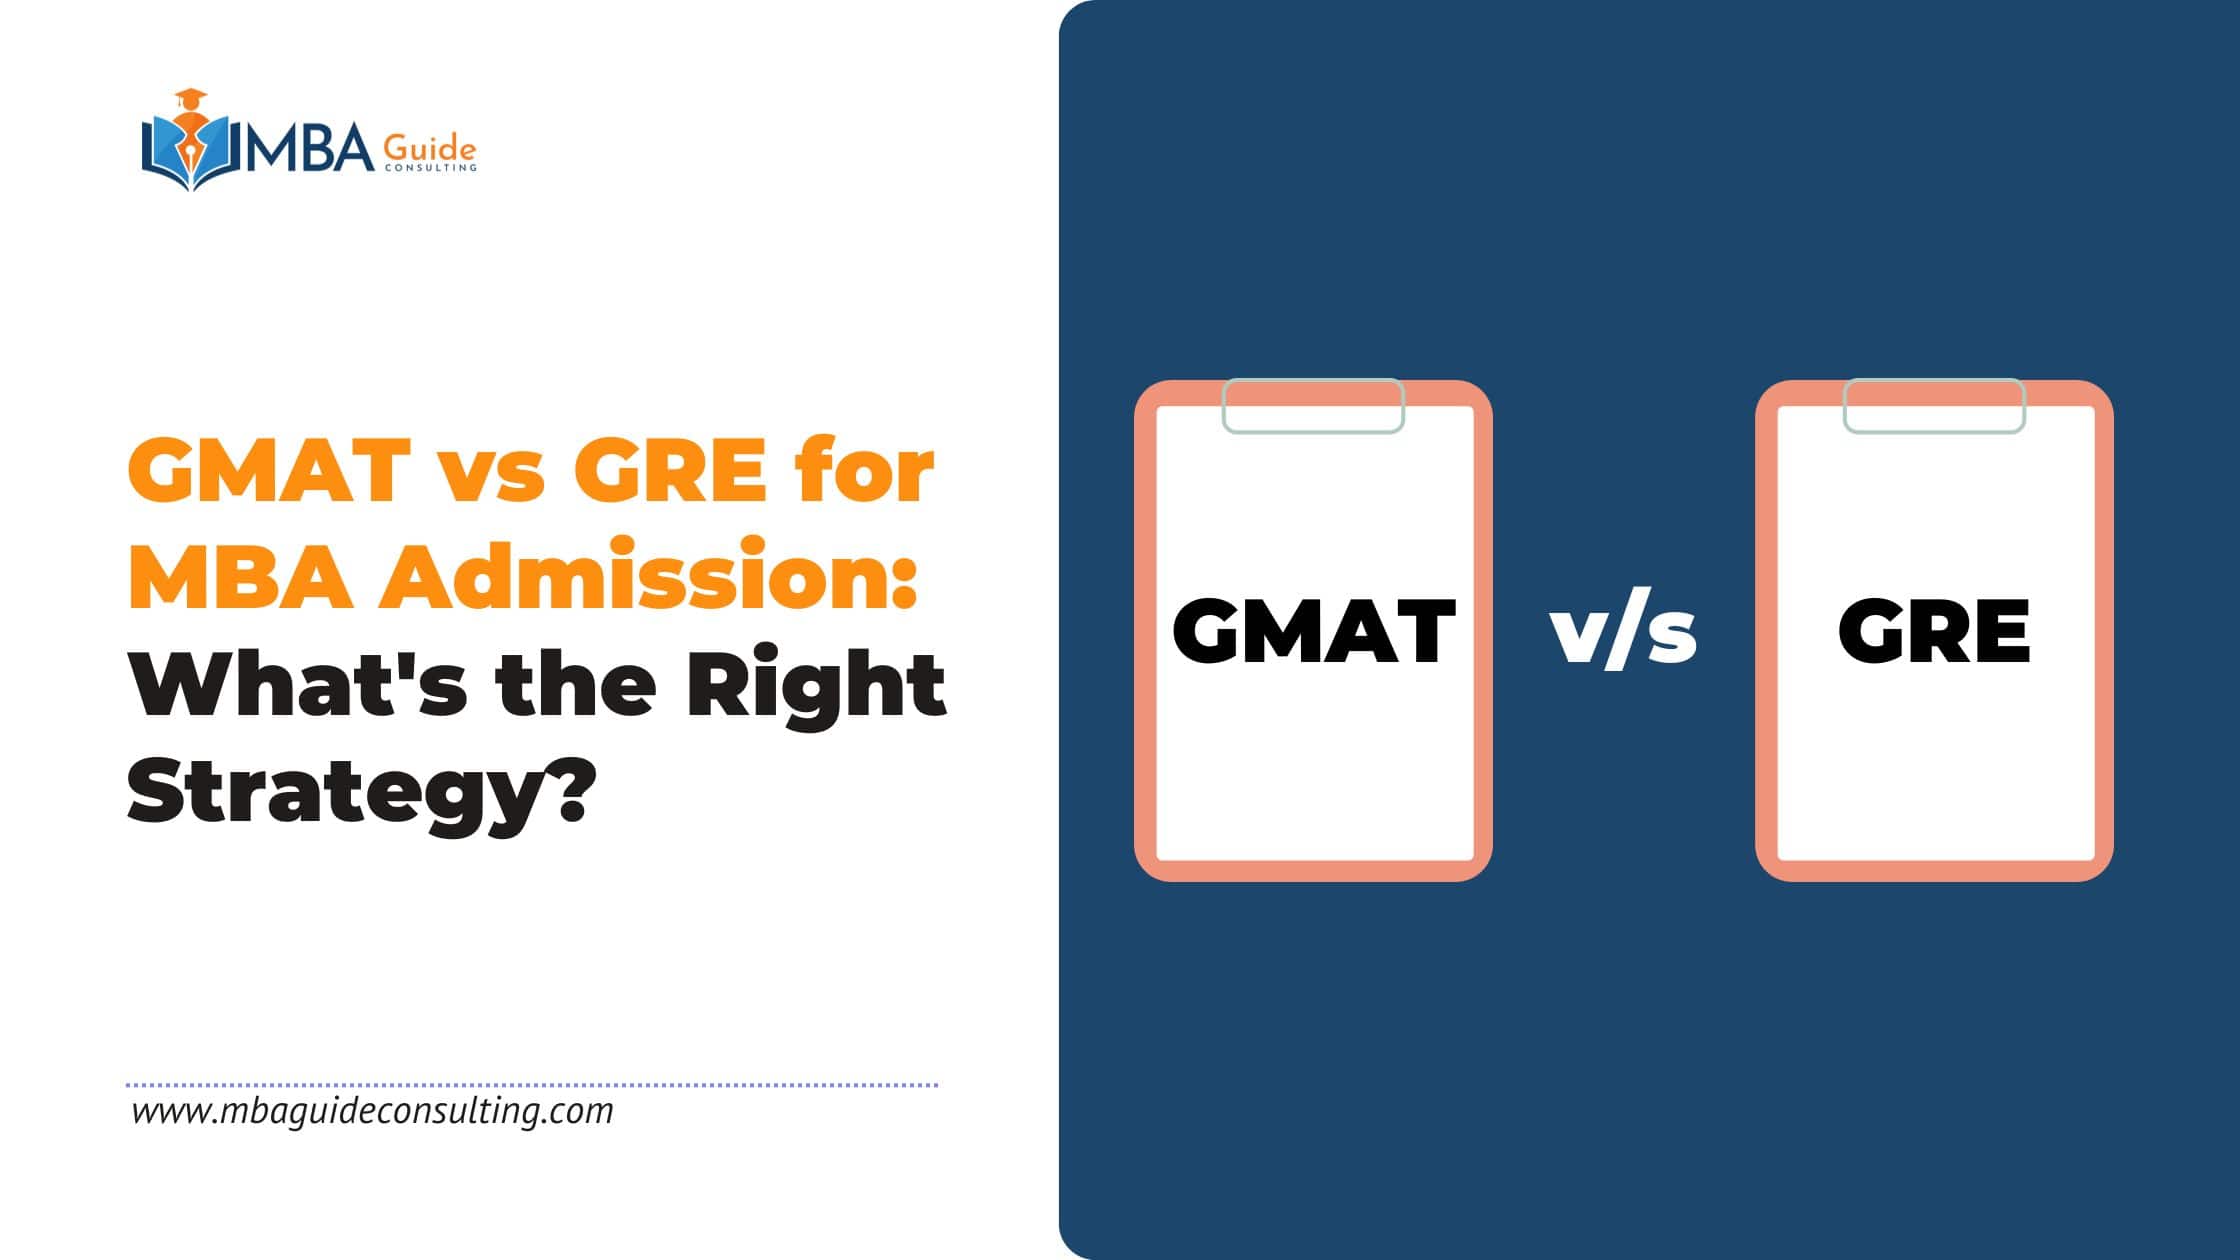 GMAT vs GRE for MBA Admission What's the Right Strategy